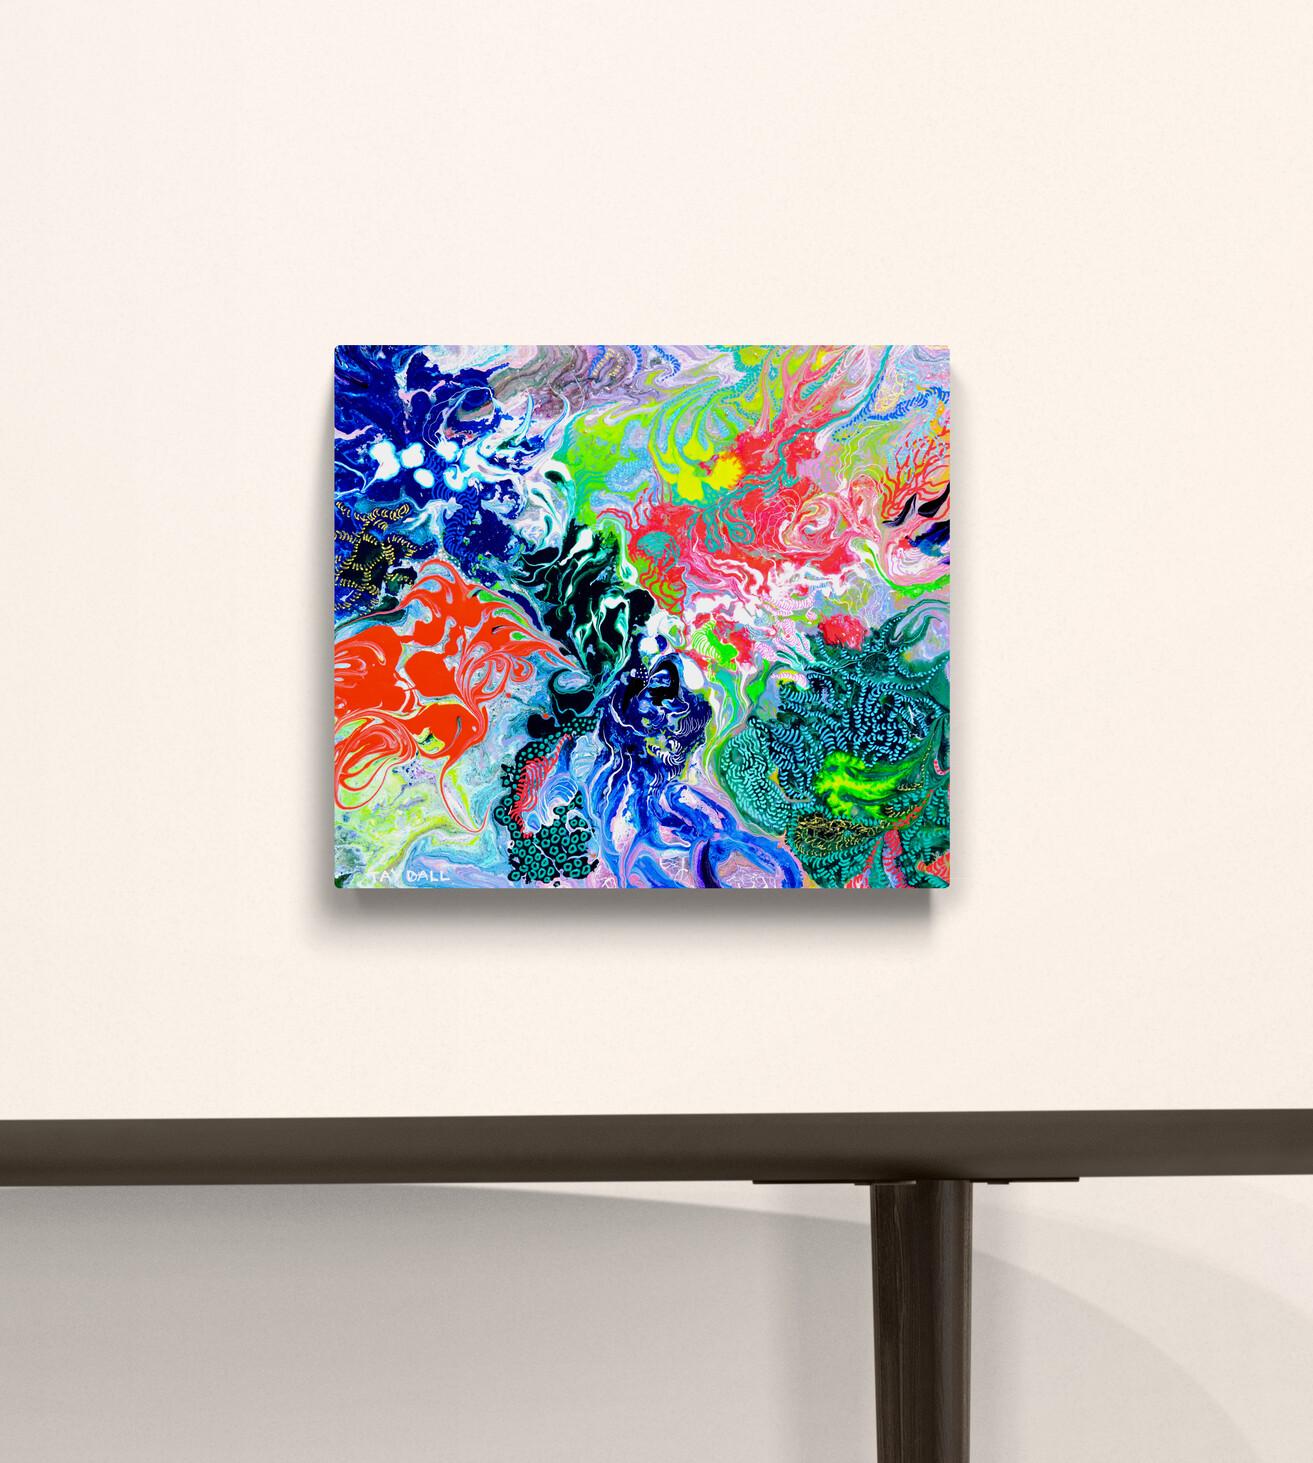 A colourful, detailed, unique and vivid abstract oil and enamel painting on stretched canvas. Poured enamel paint creates a marbled effect, with added oil paint details. Ready to hang. Framing on request.
FREE SHIPPING!